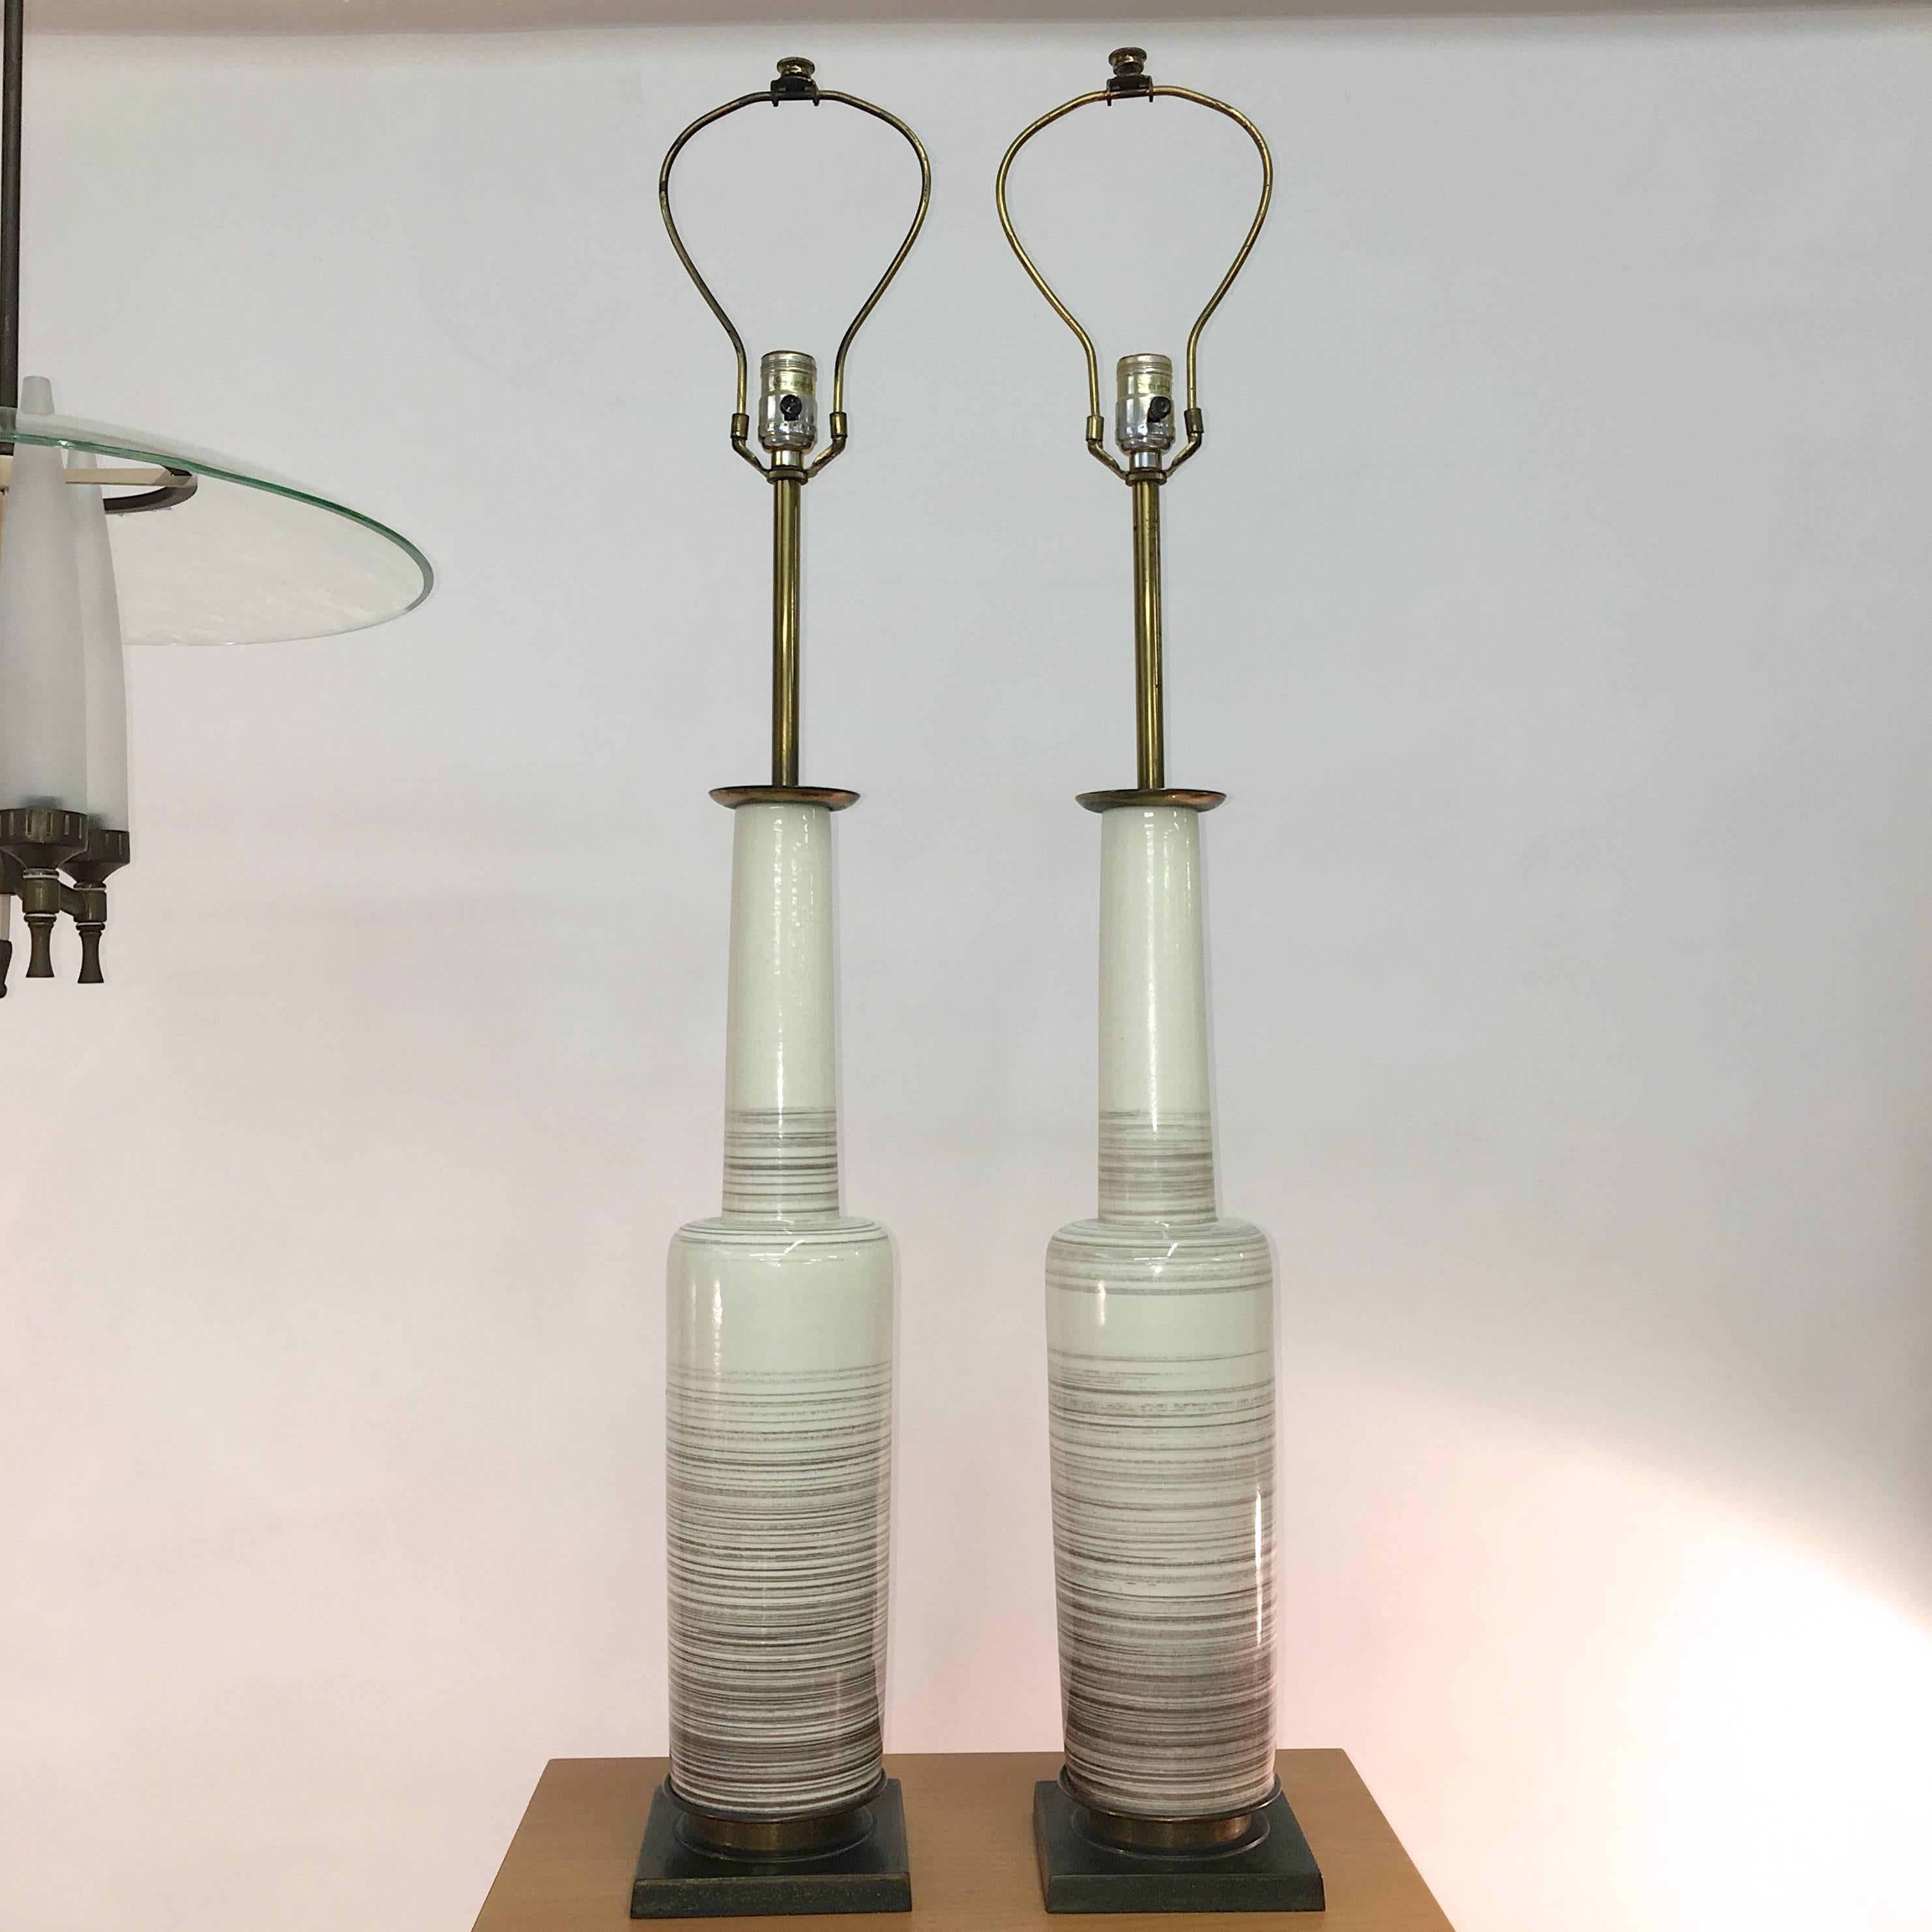 Pair of Mid-Century Modern glazed ceramic bottle vase form lamps on brass bases, in bone with charcoal brown striations and subtle craqueleur to glazing. 

Each measures 42in to top of finial 24in to top of base. Brass bases are 6 inches square and